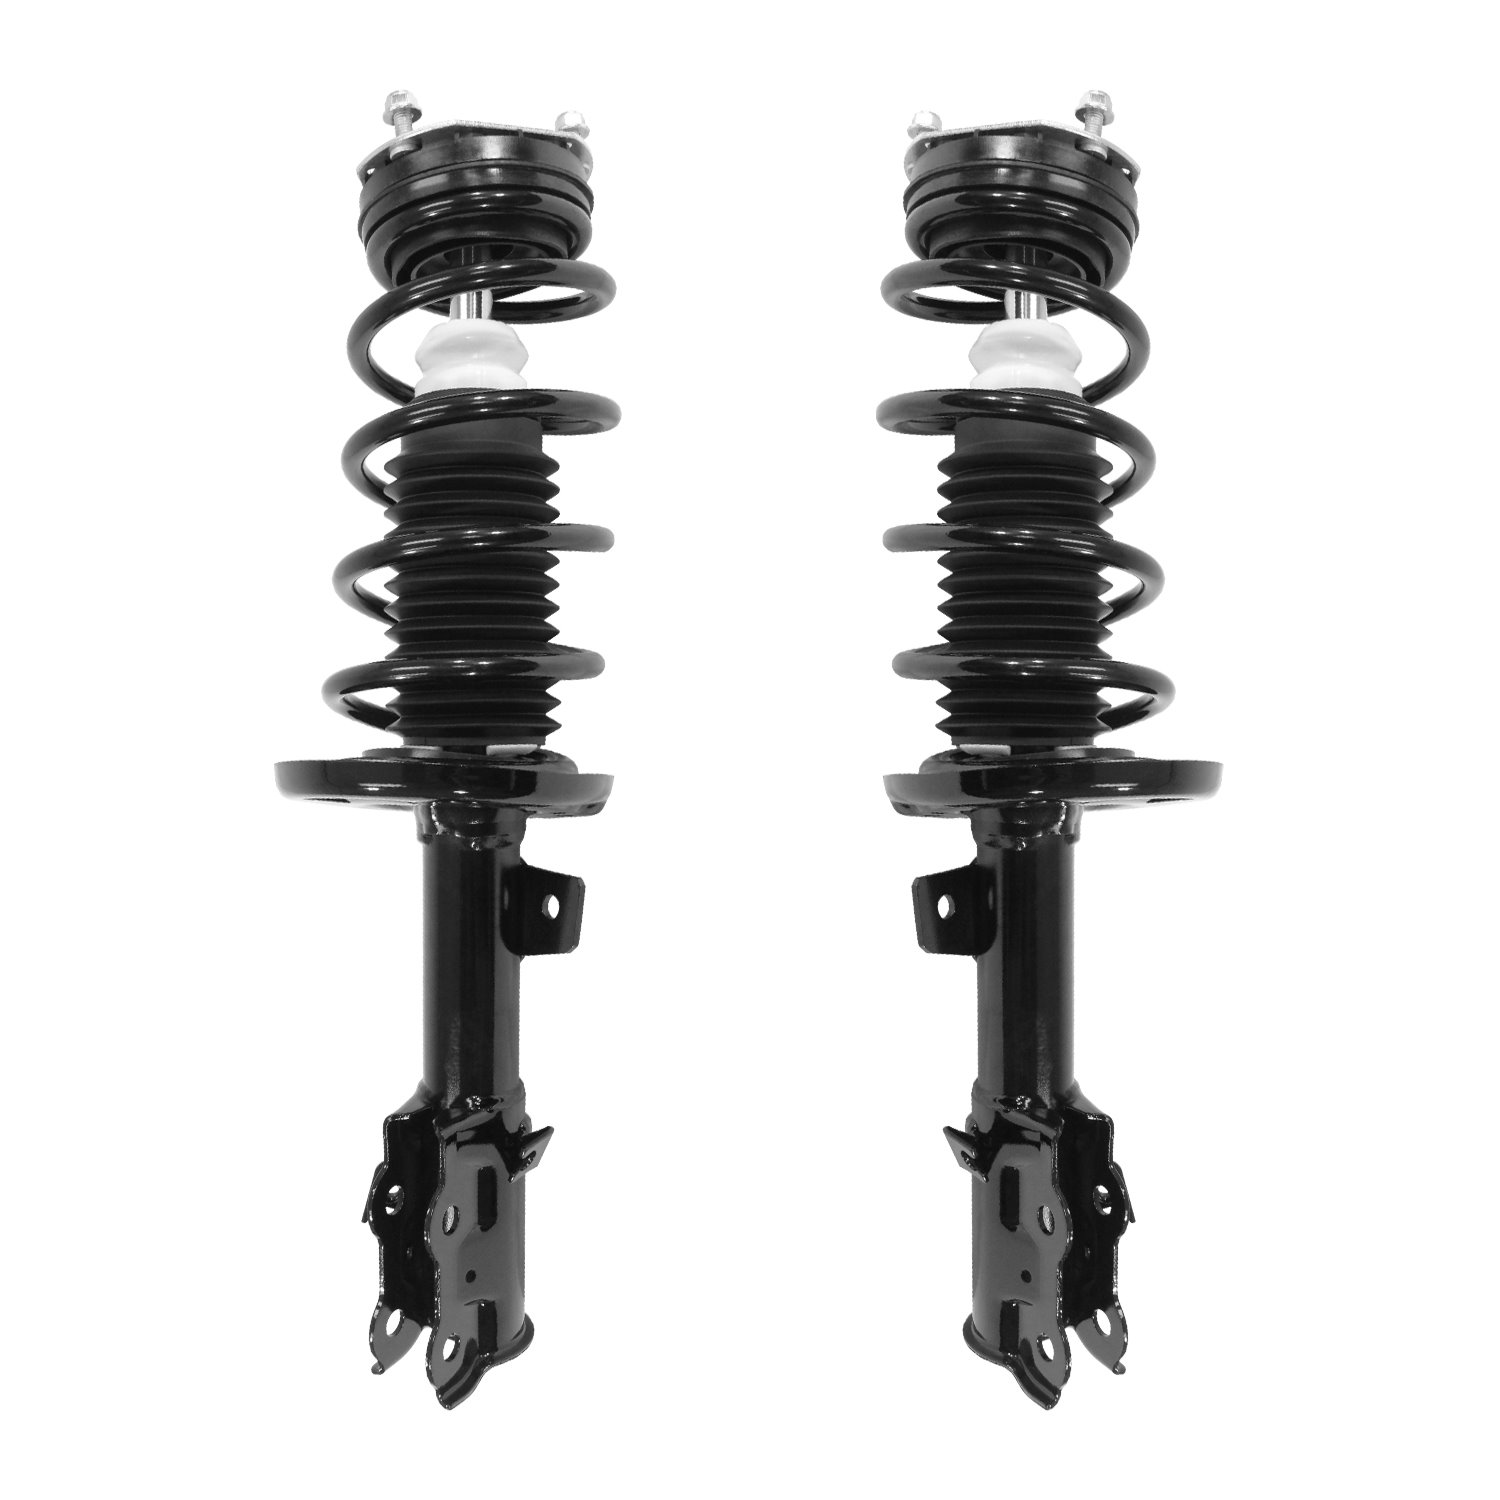 2-11937-11938-001 Suspension Strut & Coil Spring Assembly Set Fits Select Ford Fiesta